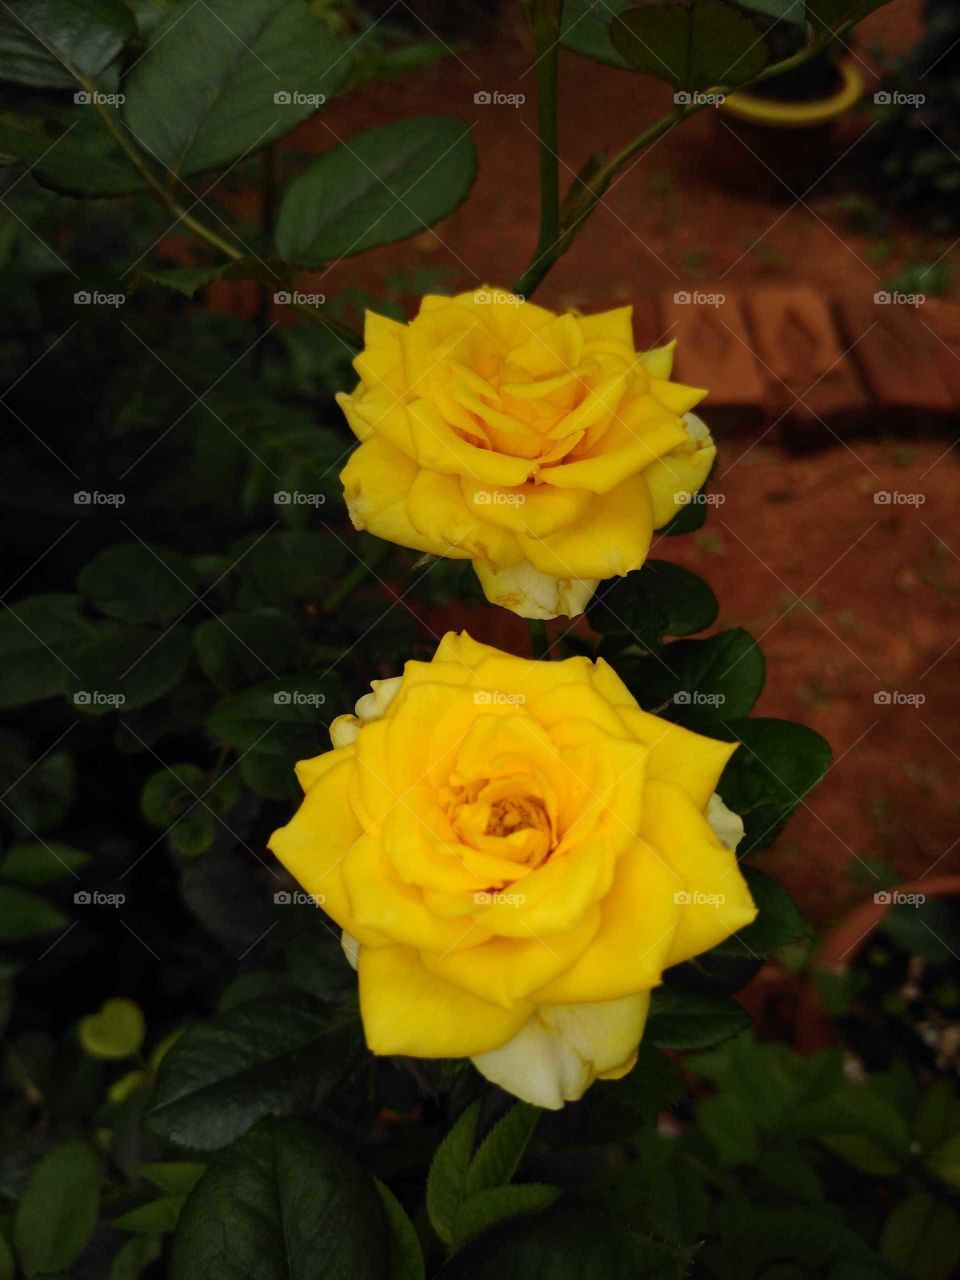 two beautiful yellow roses in my garden